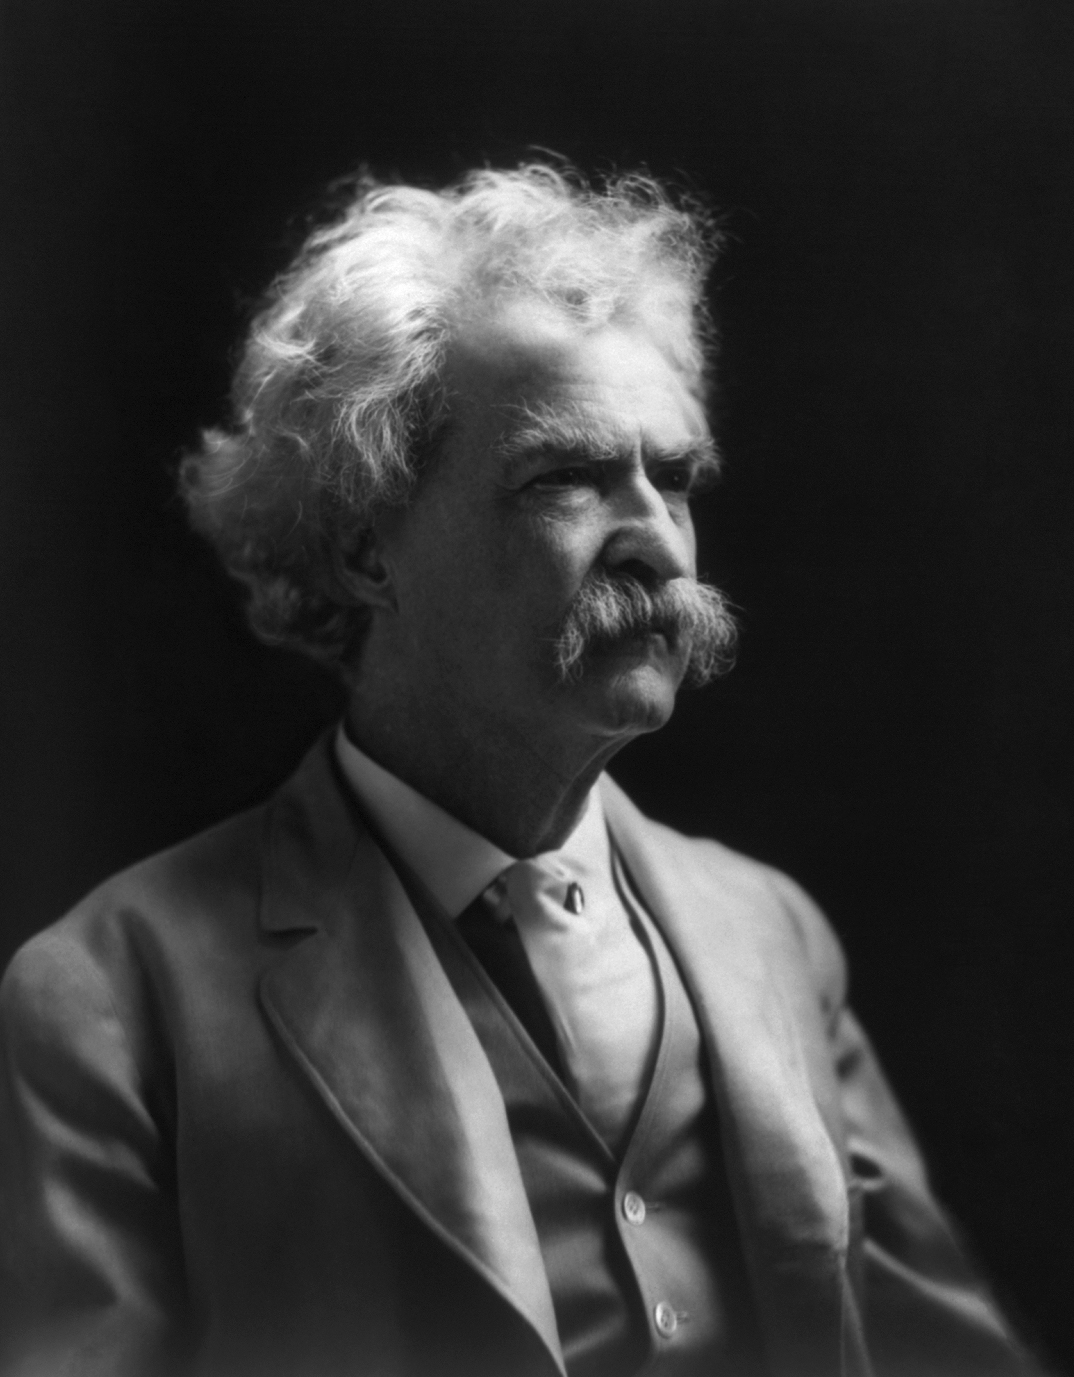 One of a series of photographs of Mark Twain taken by A.F. Bradley for the purpose, arranged by George Wharton James, of helping California poet laureate Ina Coolbrith after she lost her home in the fire following the 1906 San Francisco earthquake. In his New York City studio, Bradley placed Twain on a revolving platform to make the capture of different lighting 